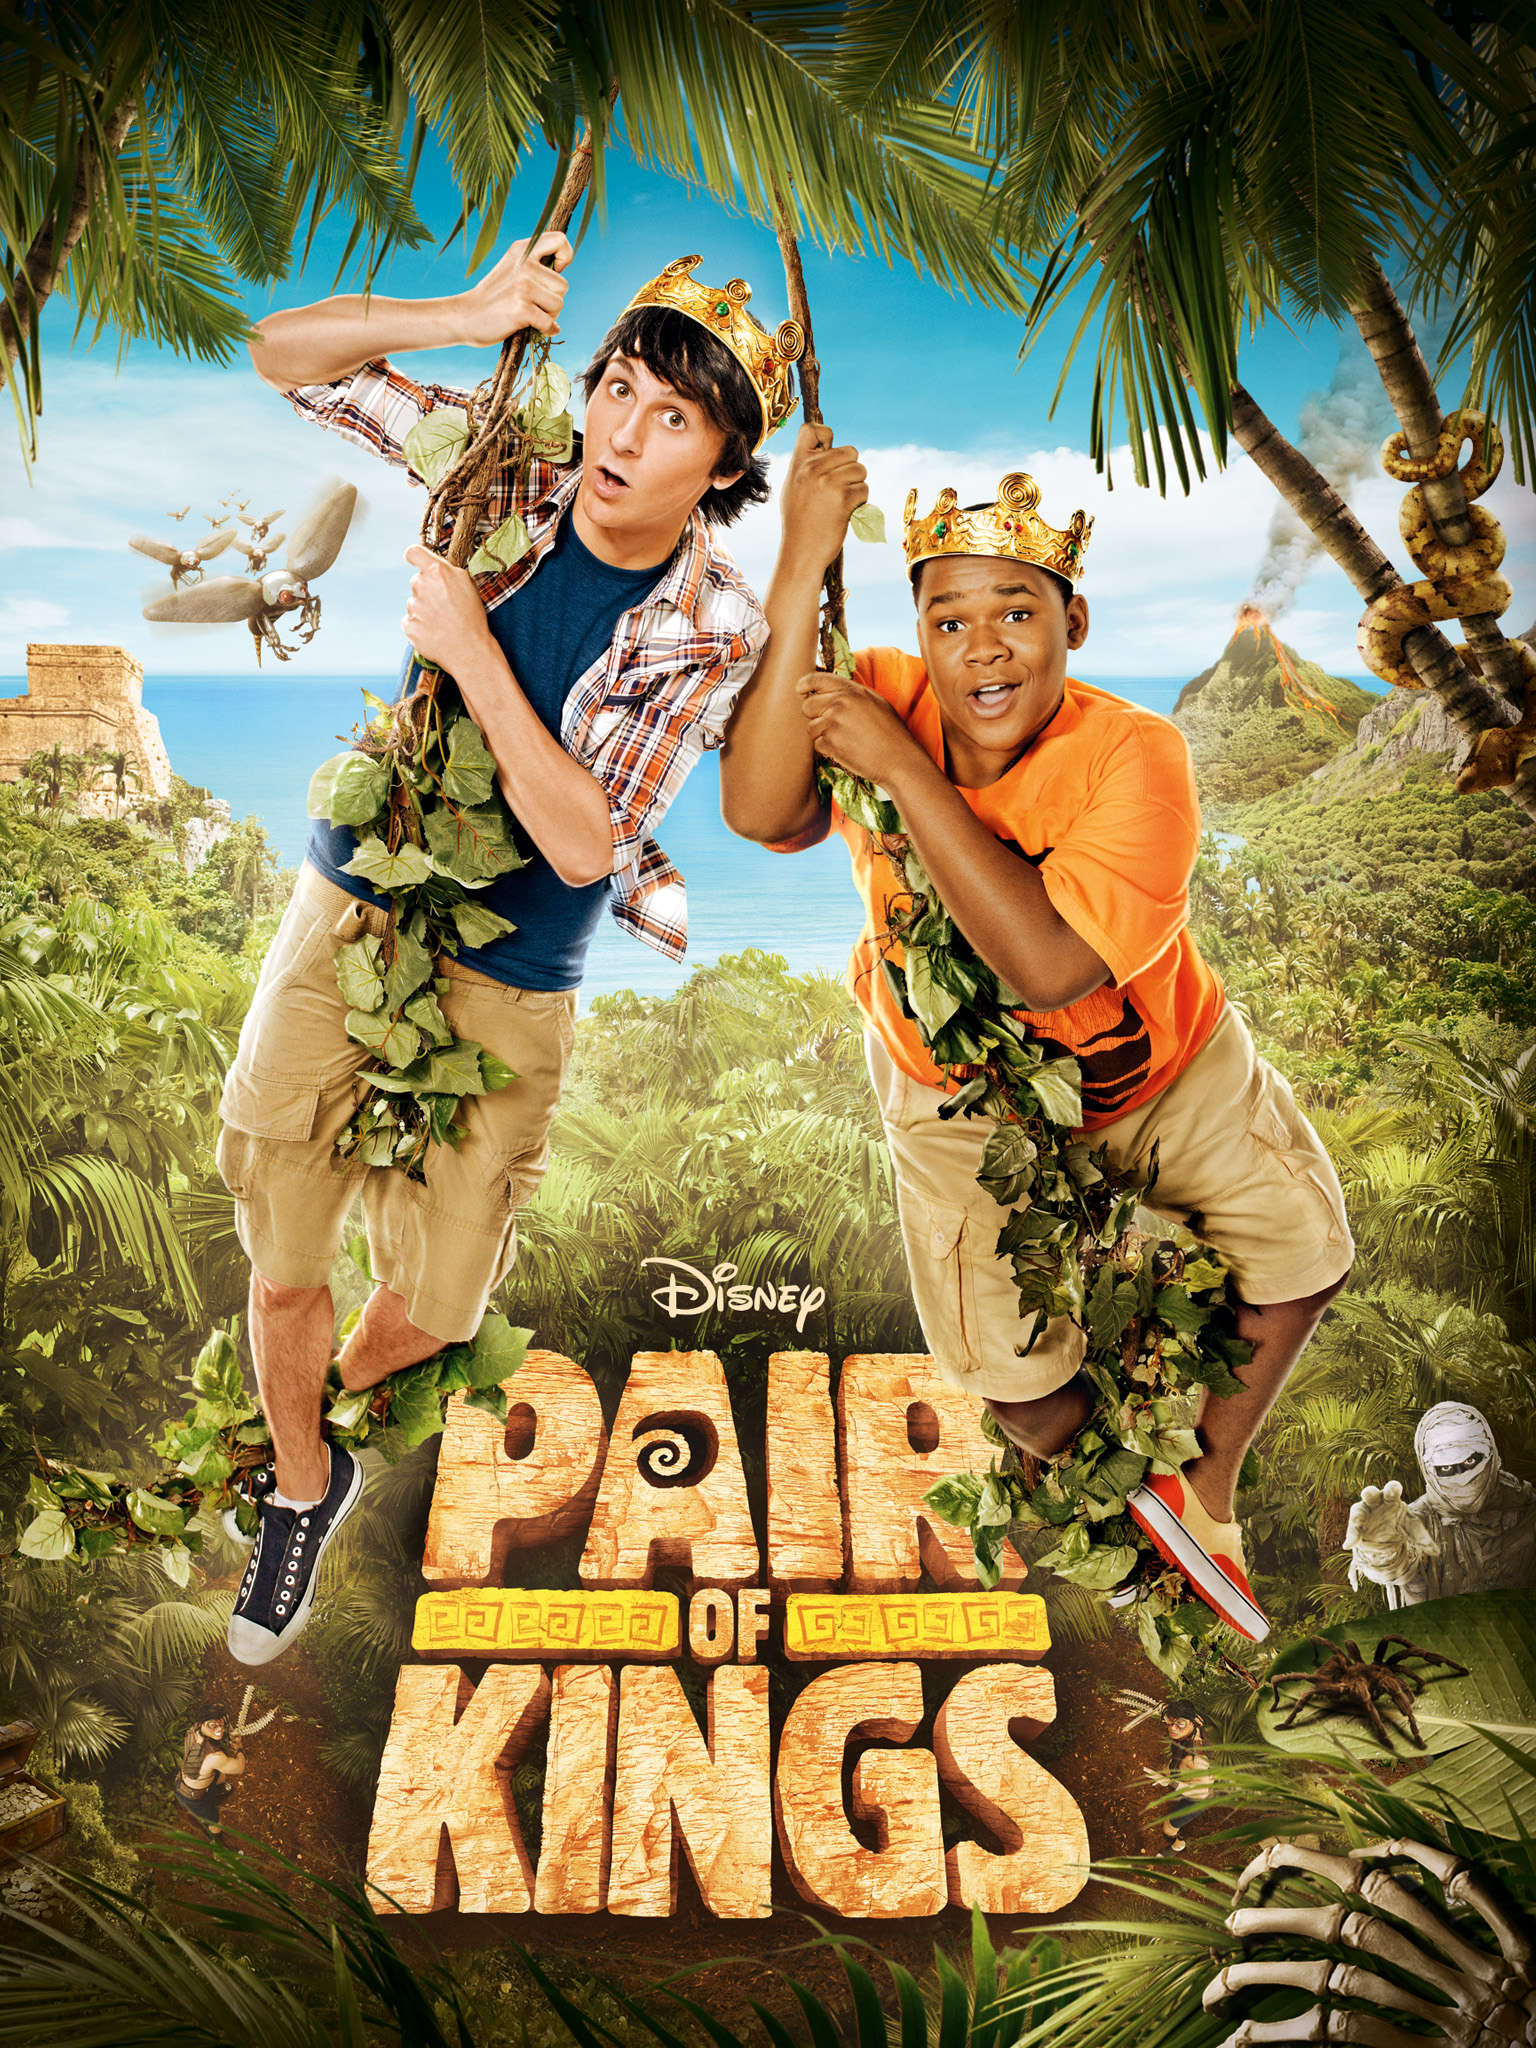 http://images1.wikia.nocookie.net/__cb20101026160027/disney/images/e/ec/Pair_of_kings_poster_1.jpg